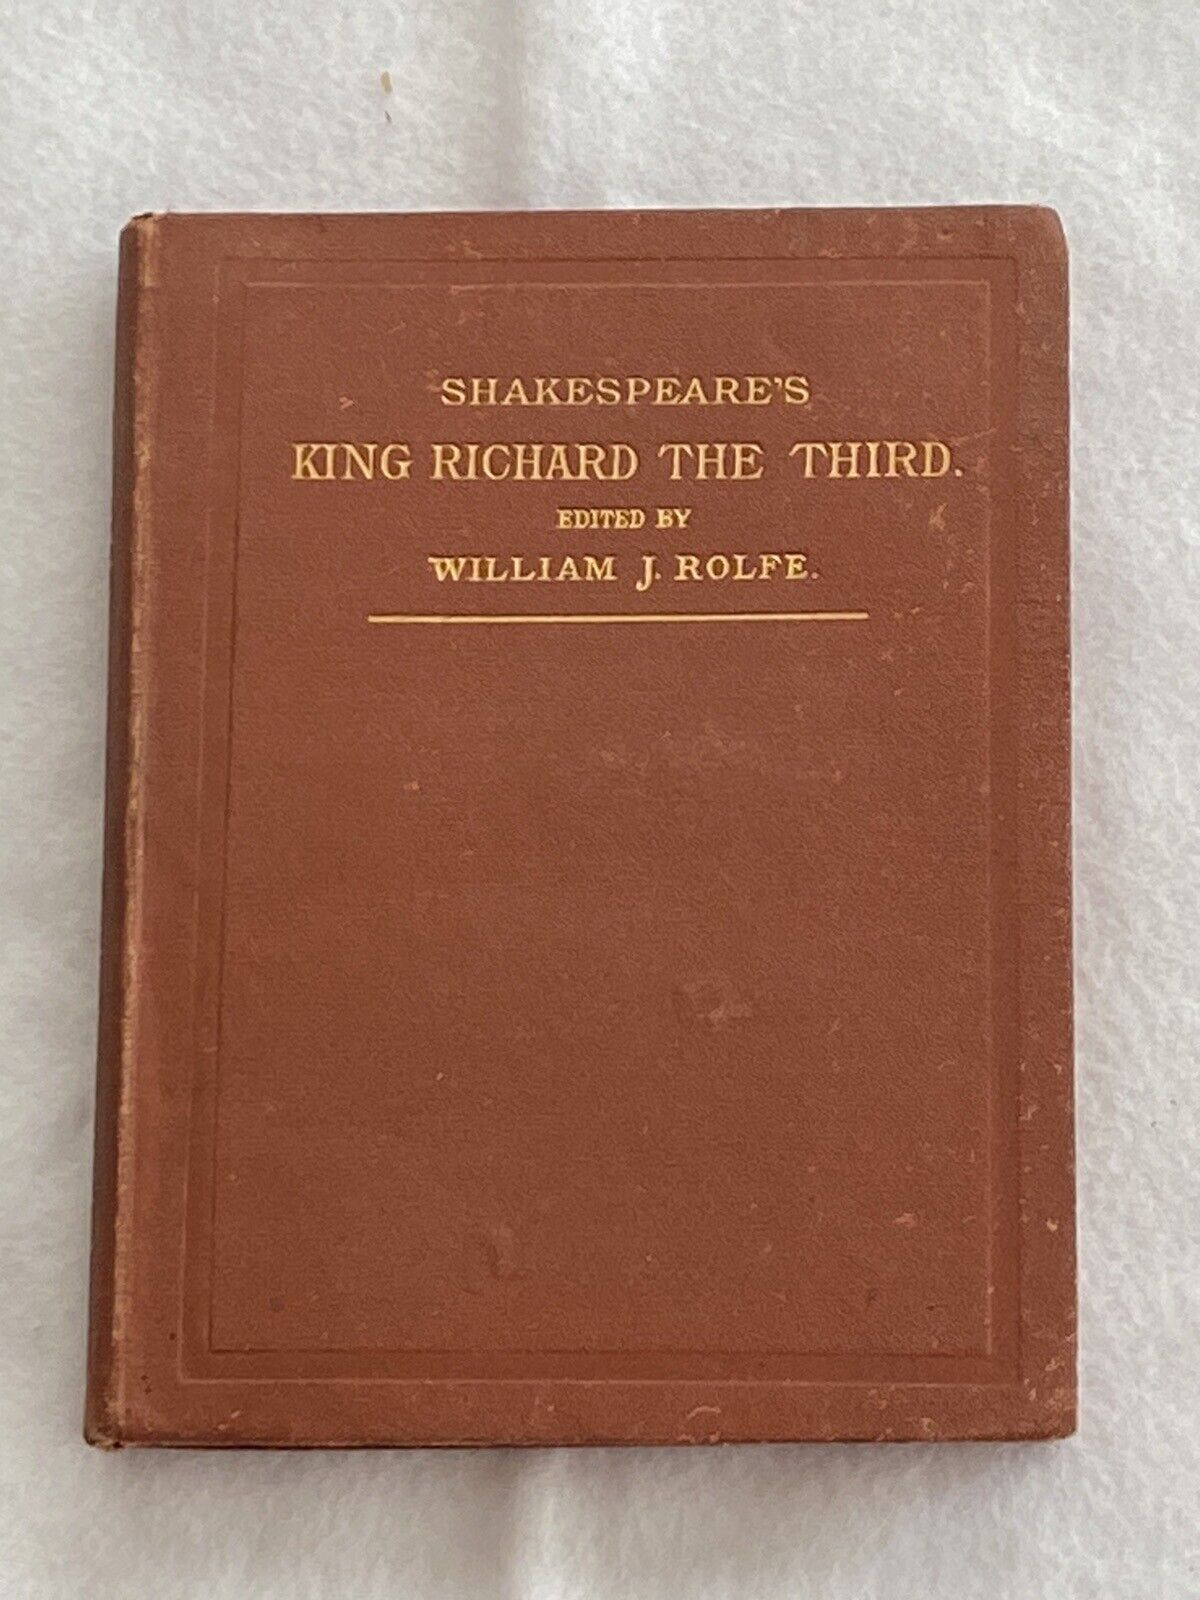 SHAKESPEARE’S KING RICHARD THE THIRD Edited by William J. Rolfe 1883